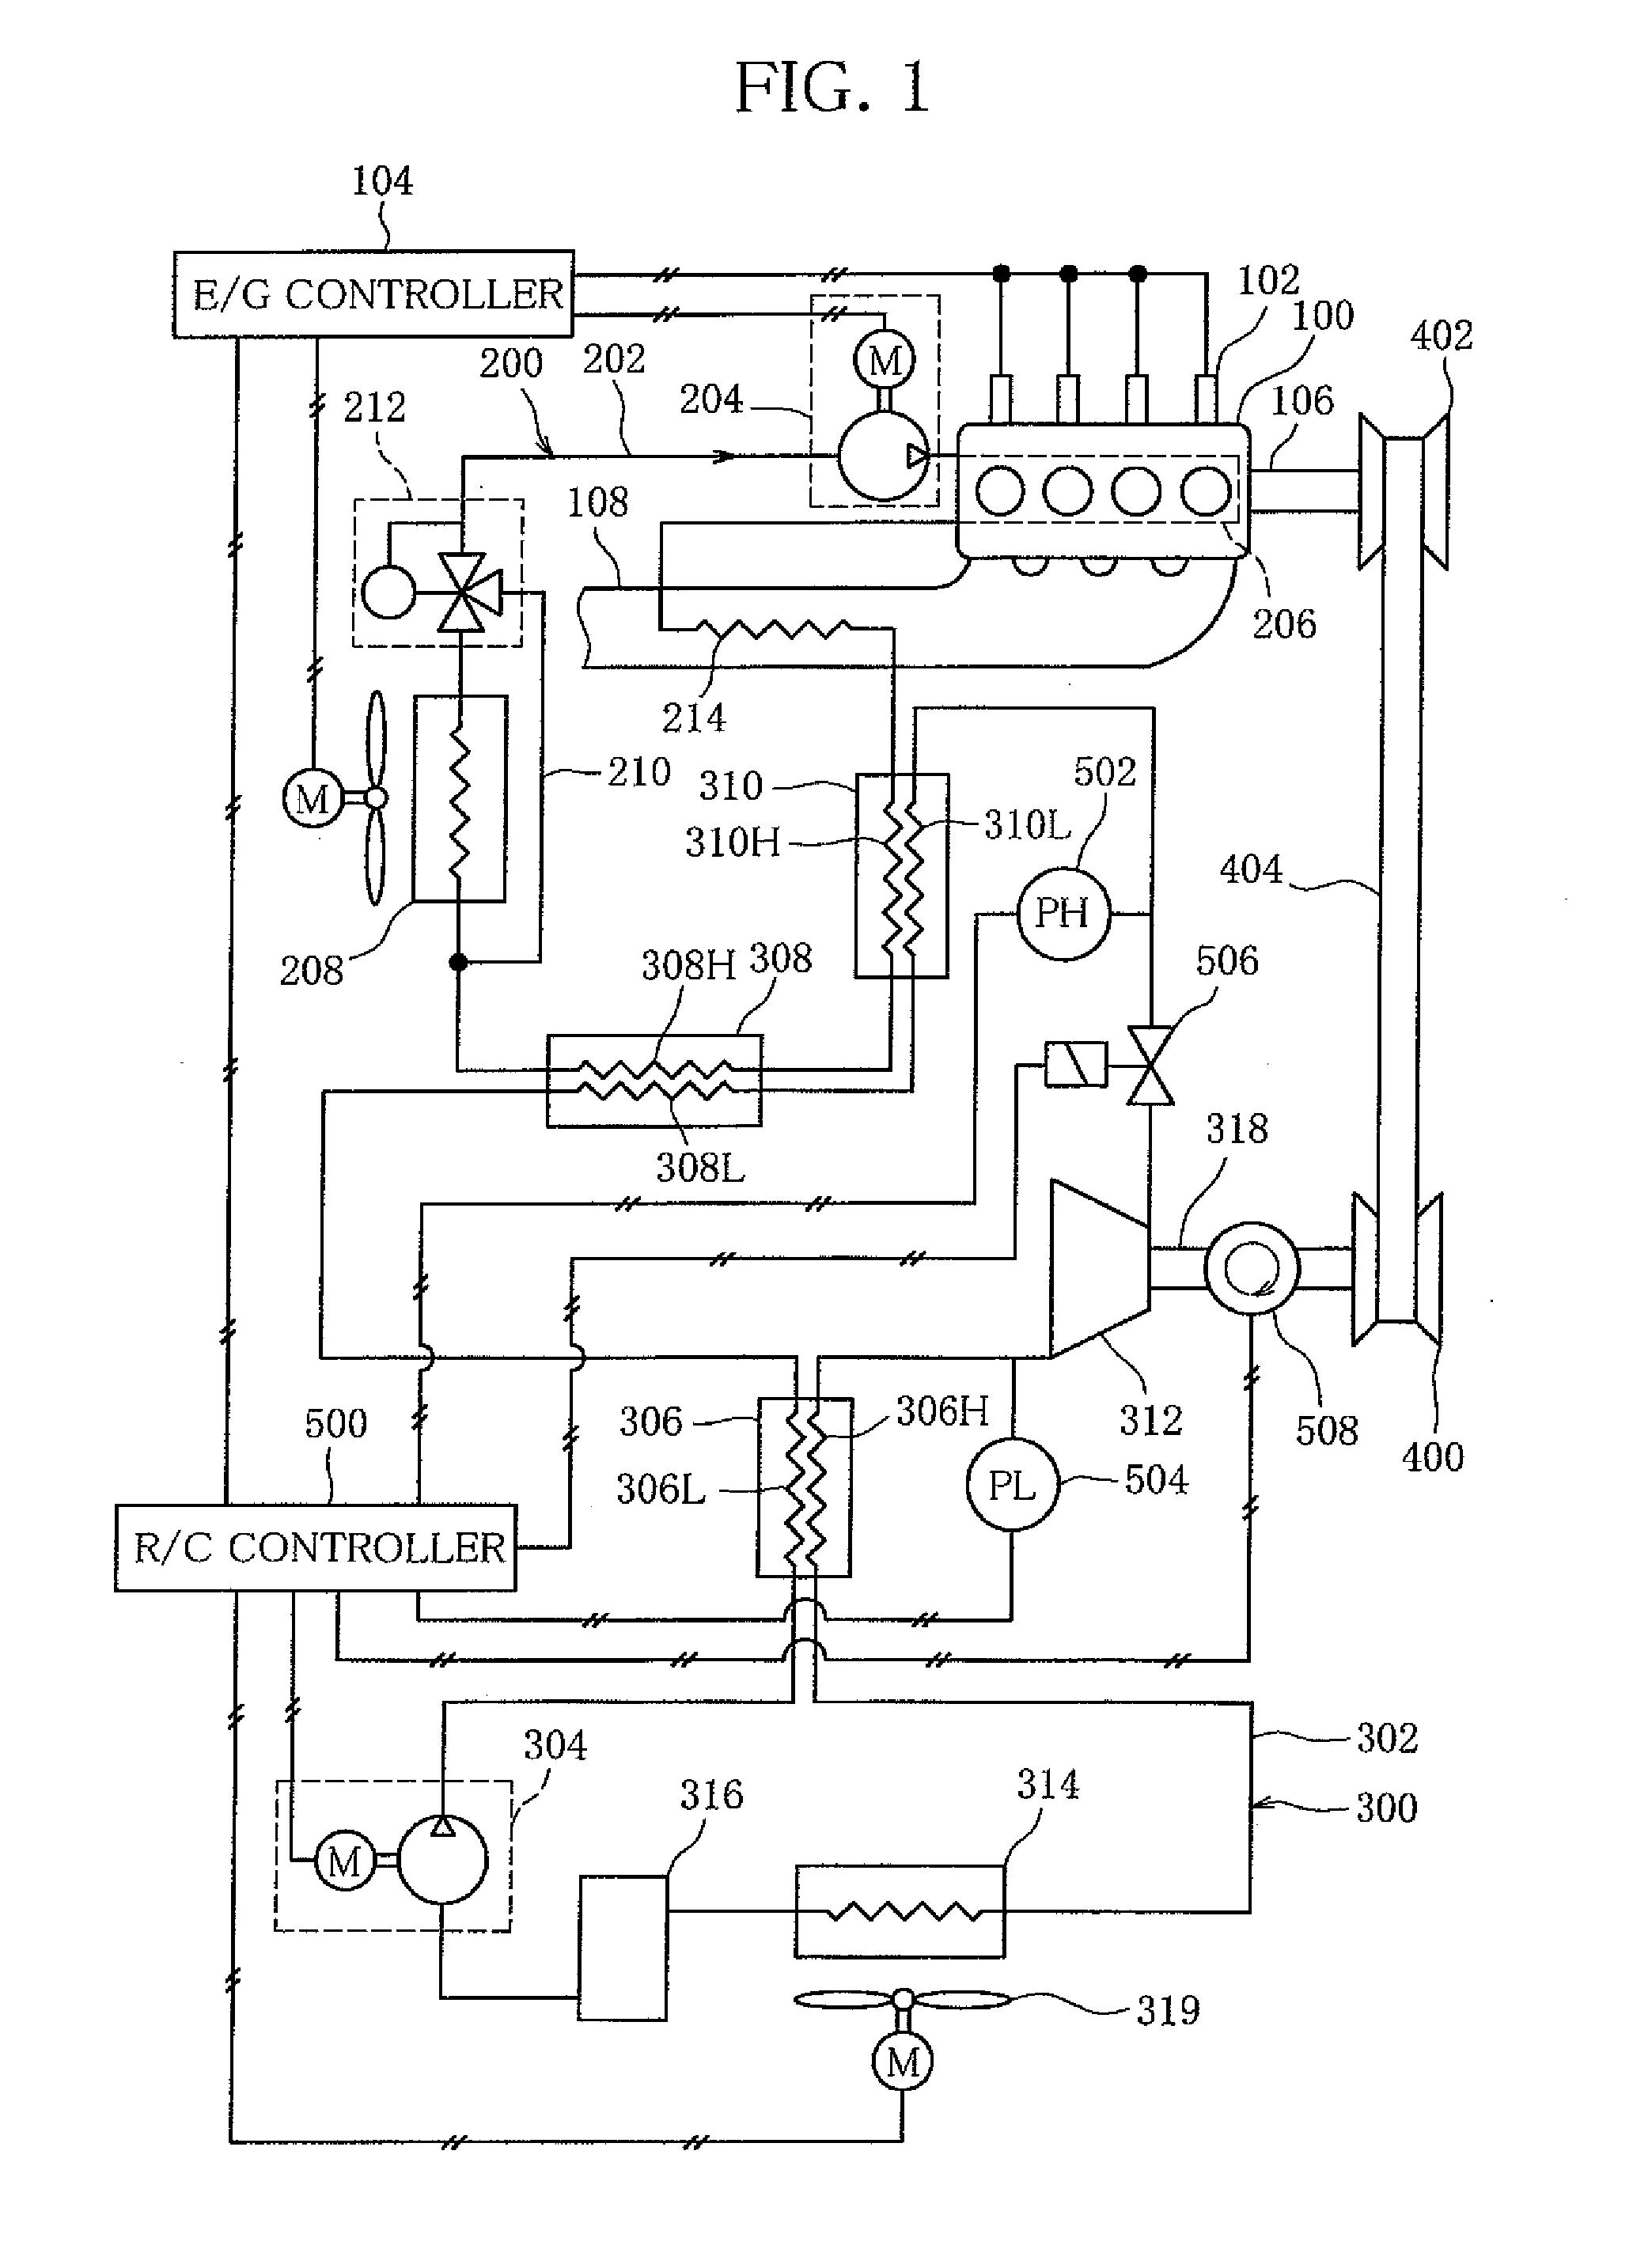 Waste Heat Recovery System of Internal Combustion Engine